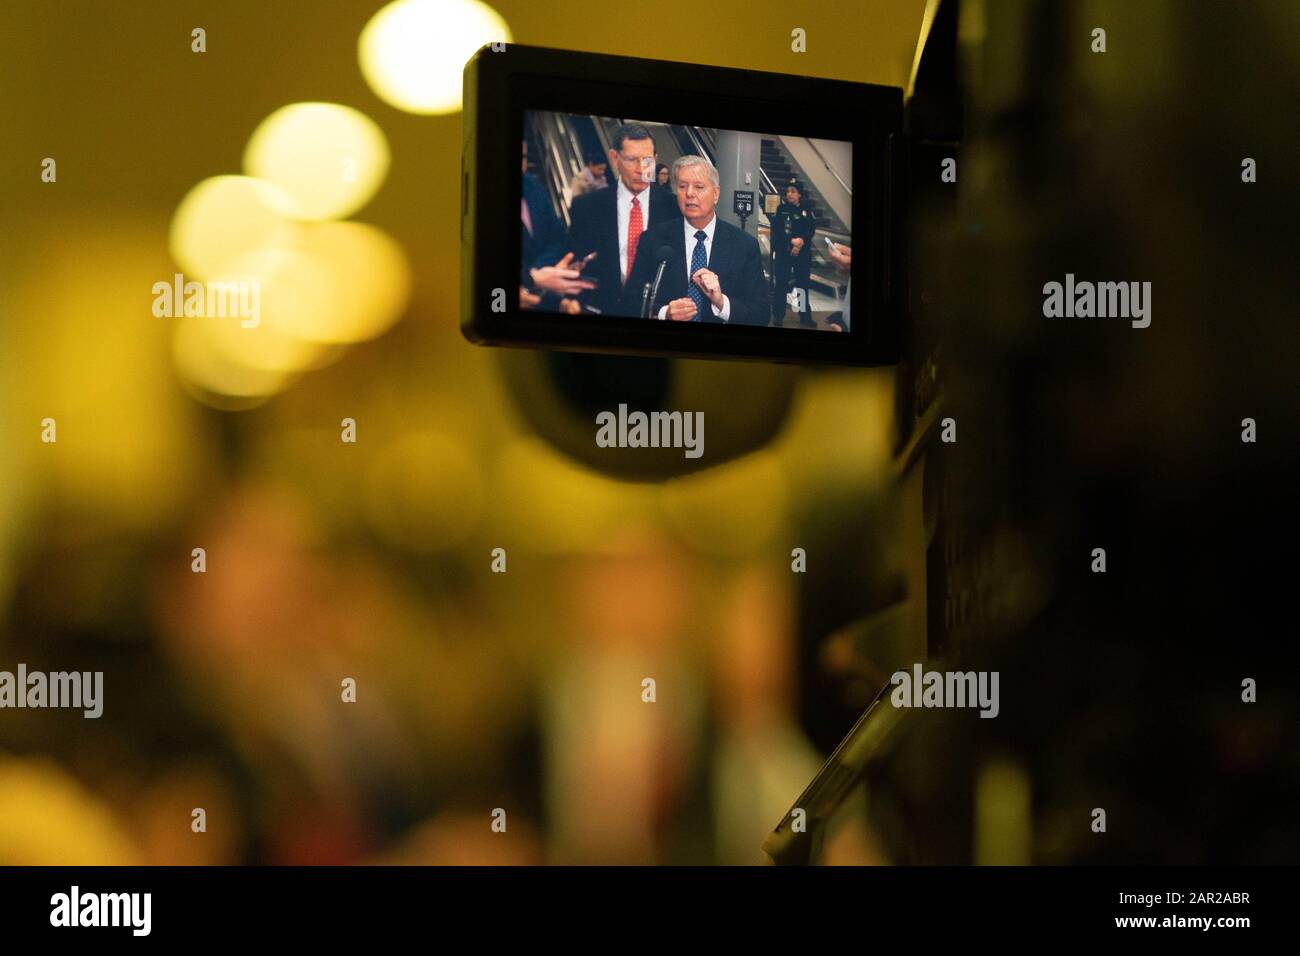 Washington, United States. 25th Jan, 2020. U.S. Sen. Lindsey Graham (R-SC) speaks to the media at a press conference on Capitol Hill during the continuation of the Impeachment trial against President Trump in Washington, DC on Saturday, January 25, 2020. Trump is facing two articles of impeachment; abuse of power and obstruction of congress. Photo by Ken Cedeno/UPI Credit: UPI/Alamy Live News Stock Photo